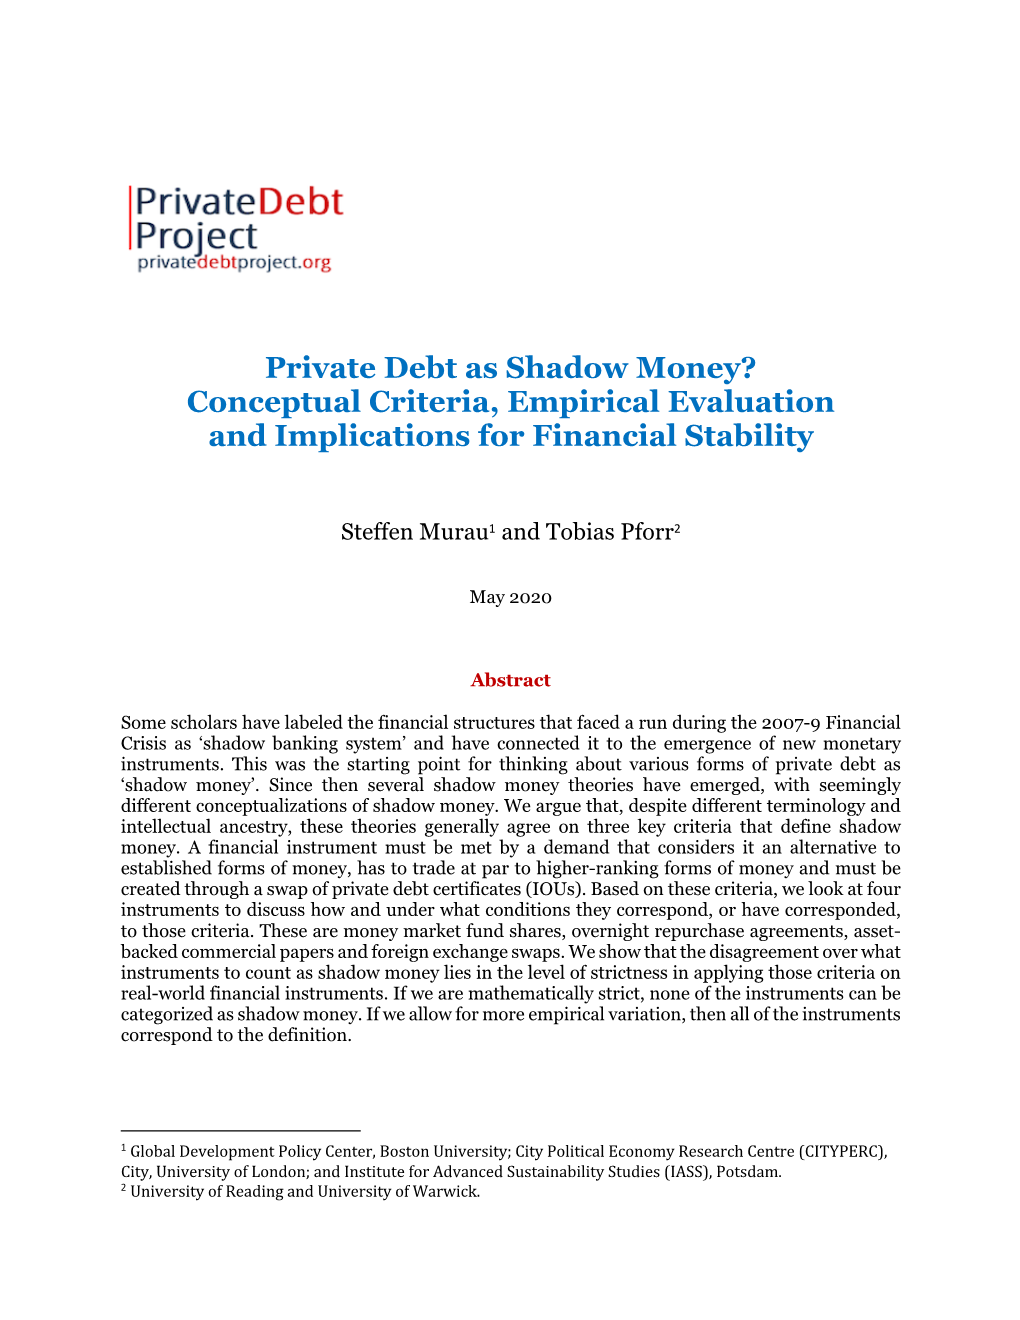 Private Debt As Shadow Money? Conceptual Criteria, Empirical Evaluation and Implications for Financial Stability